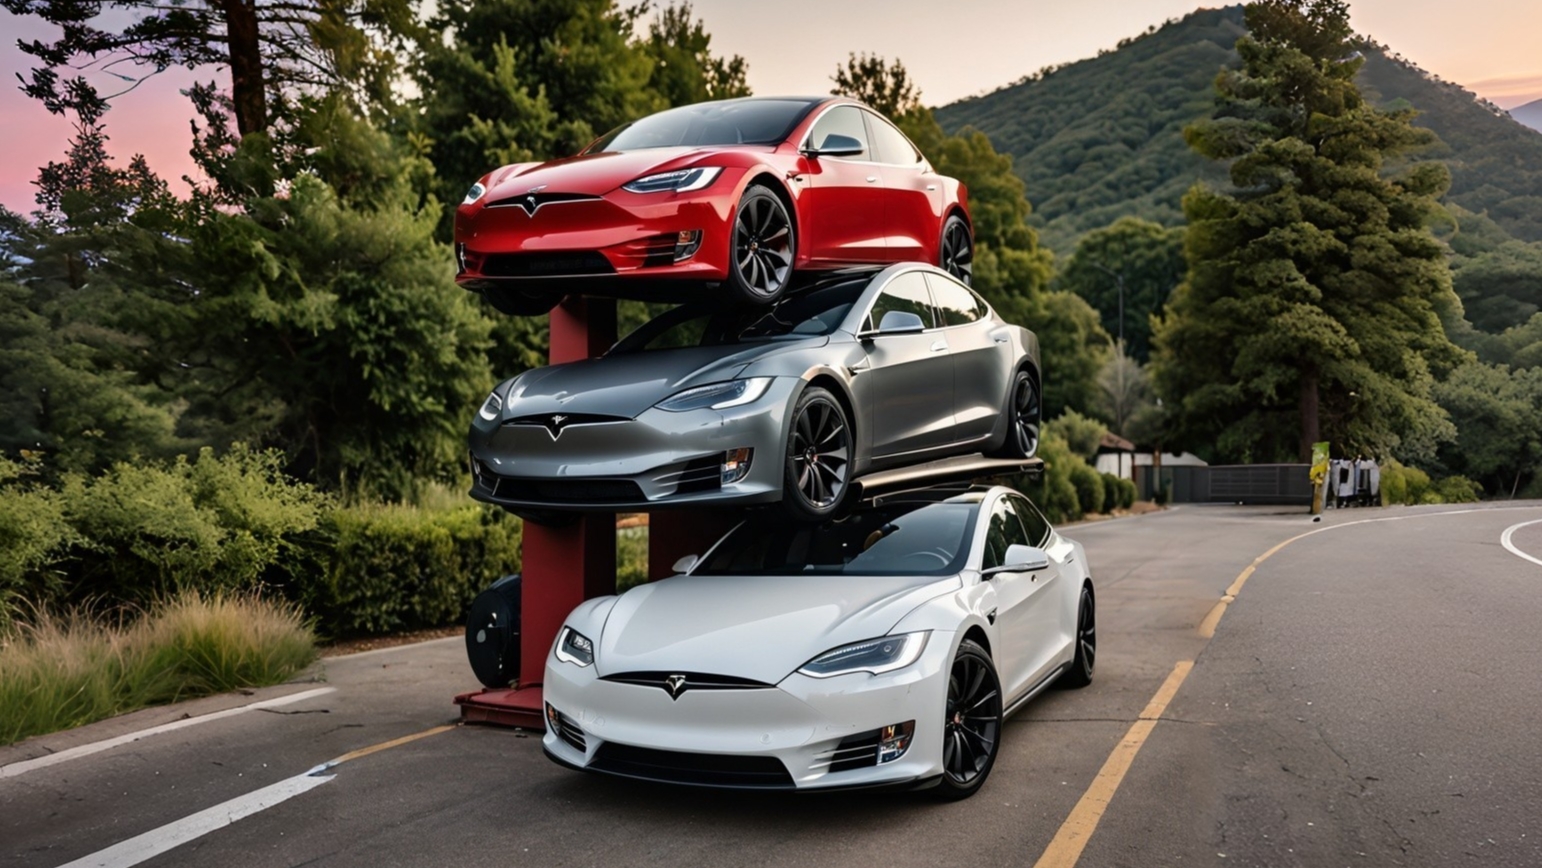 3 Tesla electric vehicles are standing on top of each other on the road